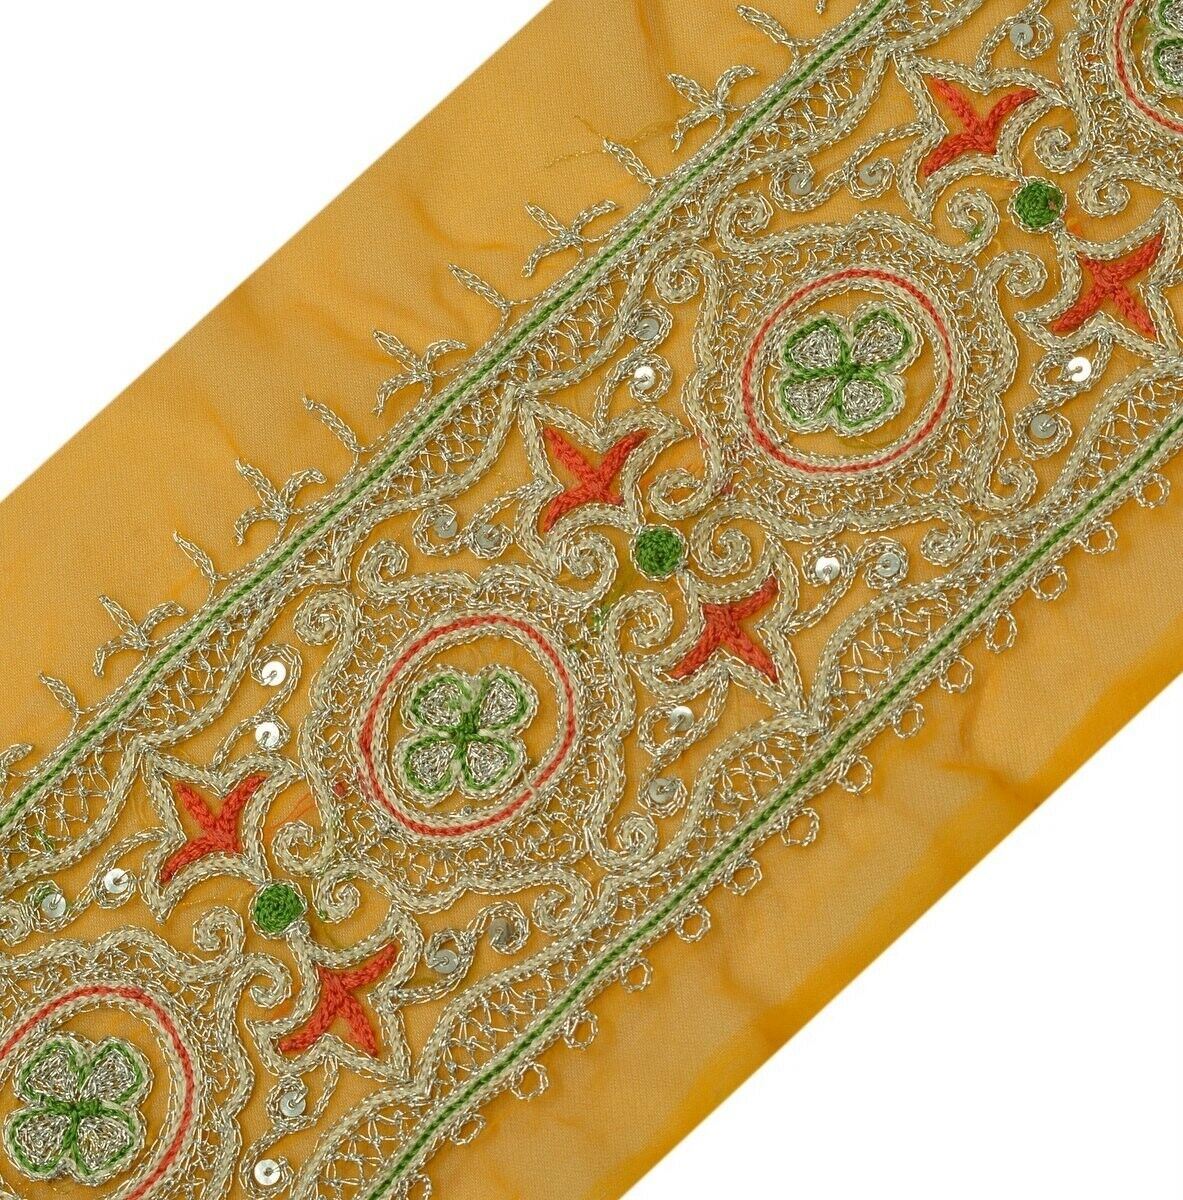 4.5" W Vintage Saree Border Indian Craft Trim Embroidered Sewing Ribbon Lace